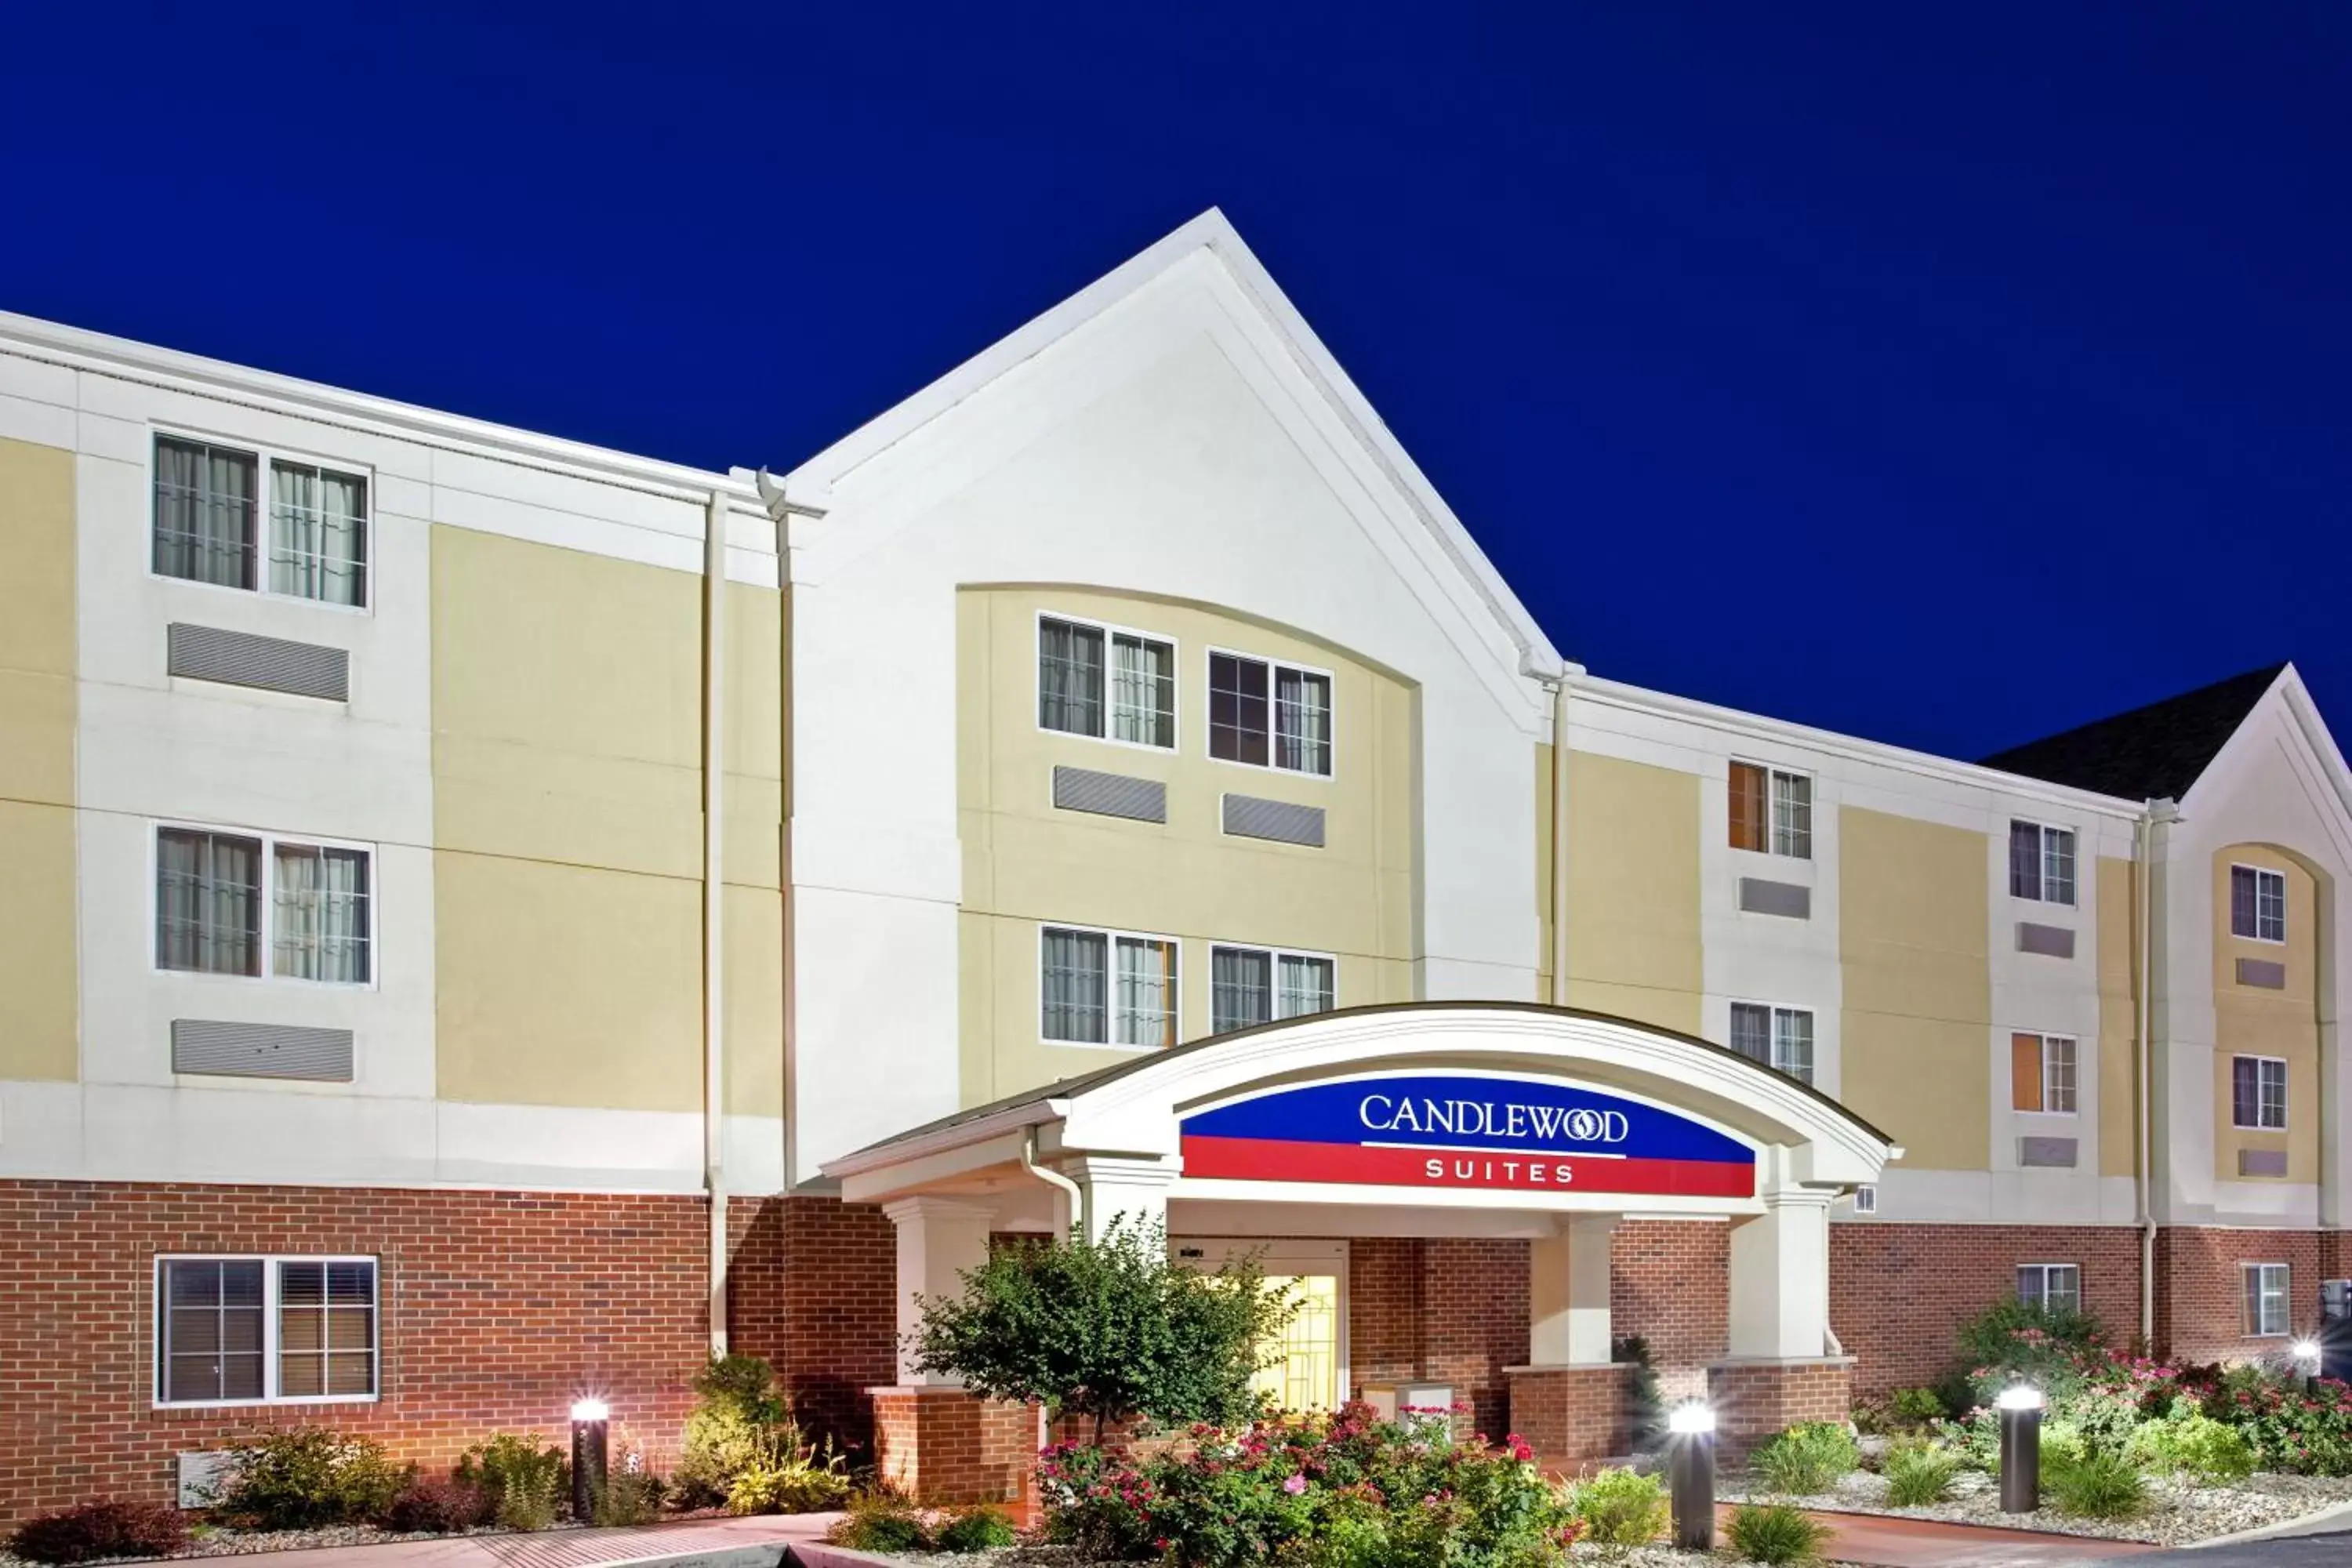 Property building in Candlewood Suites Merrillville, an IHG Hotel